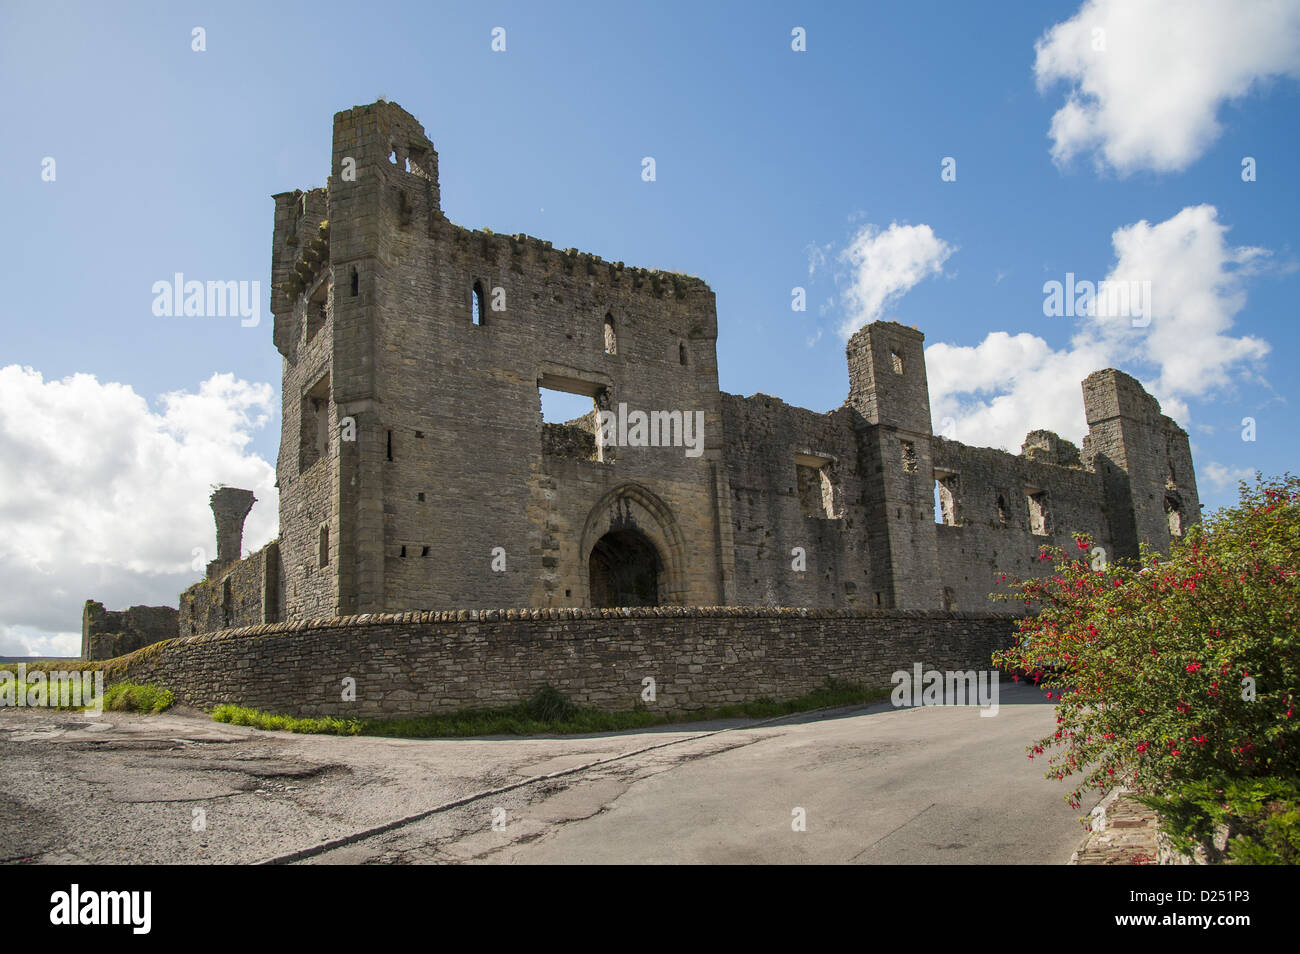 View of castle ruins, Middleham Castle, Wensleydale, North Yorkshire, England, August Stock Photo